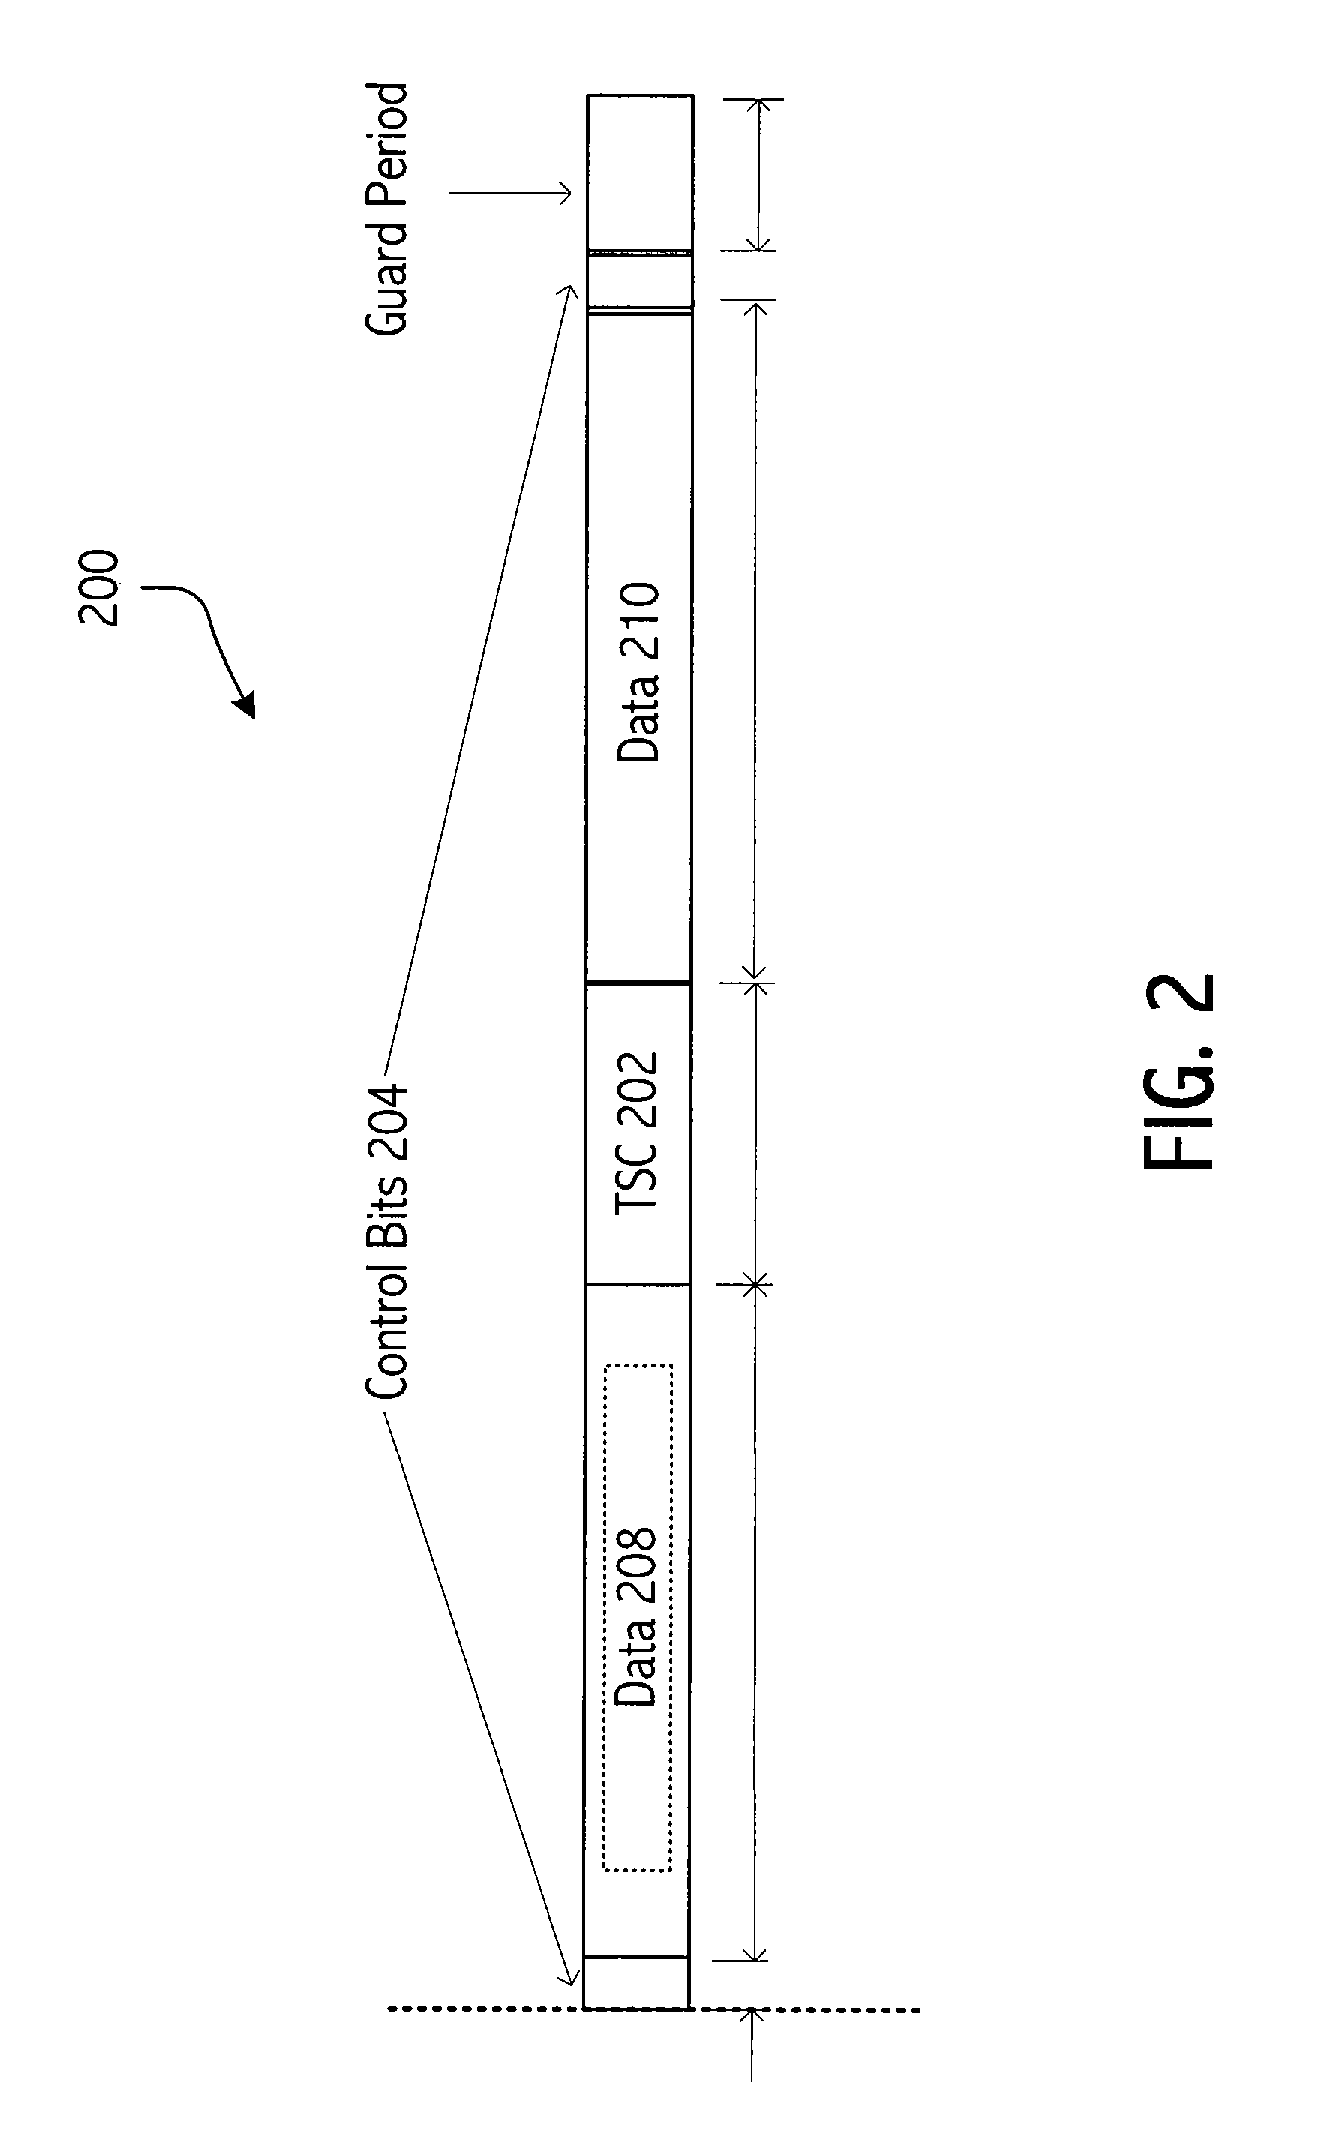 Systems and methods for interference cancellation in a multiple antenna radio receiver system